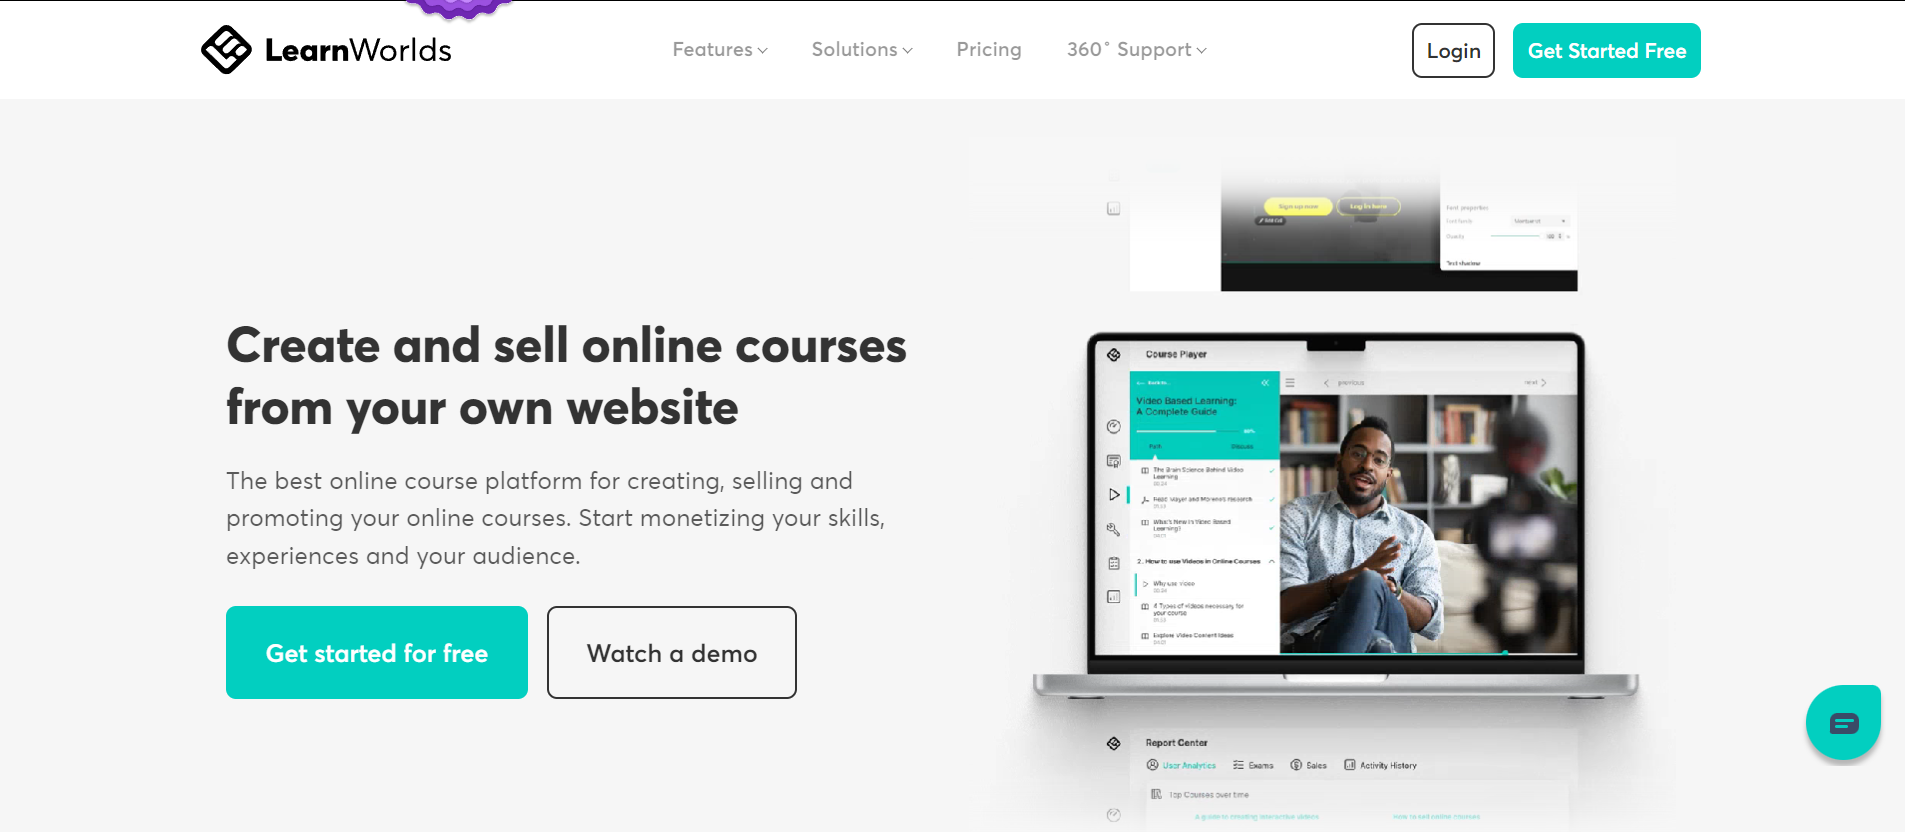 Turbocharge ROI: Sell Online Courses for 2x Profit